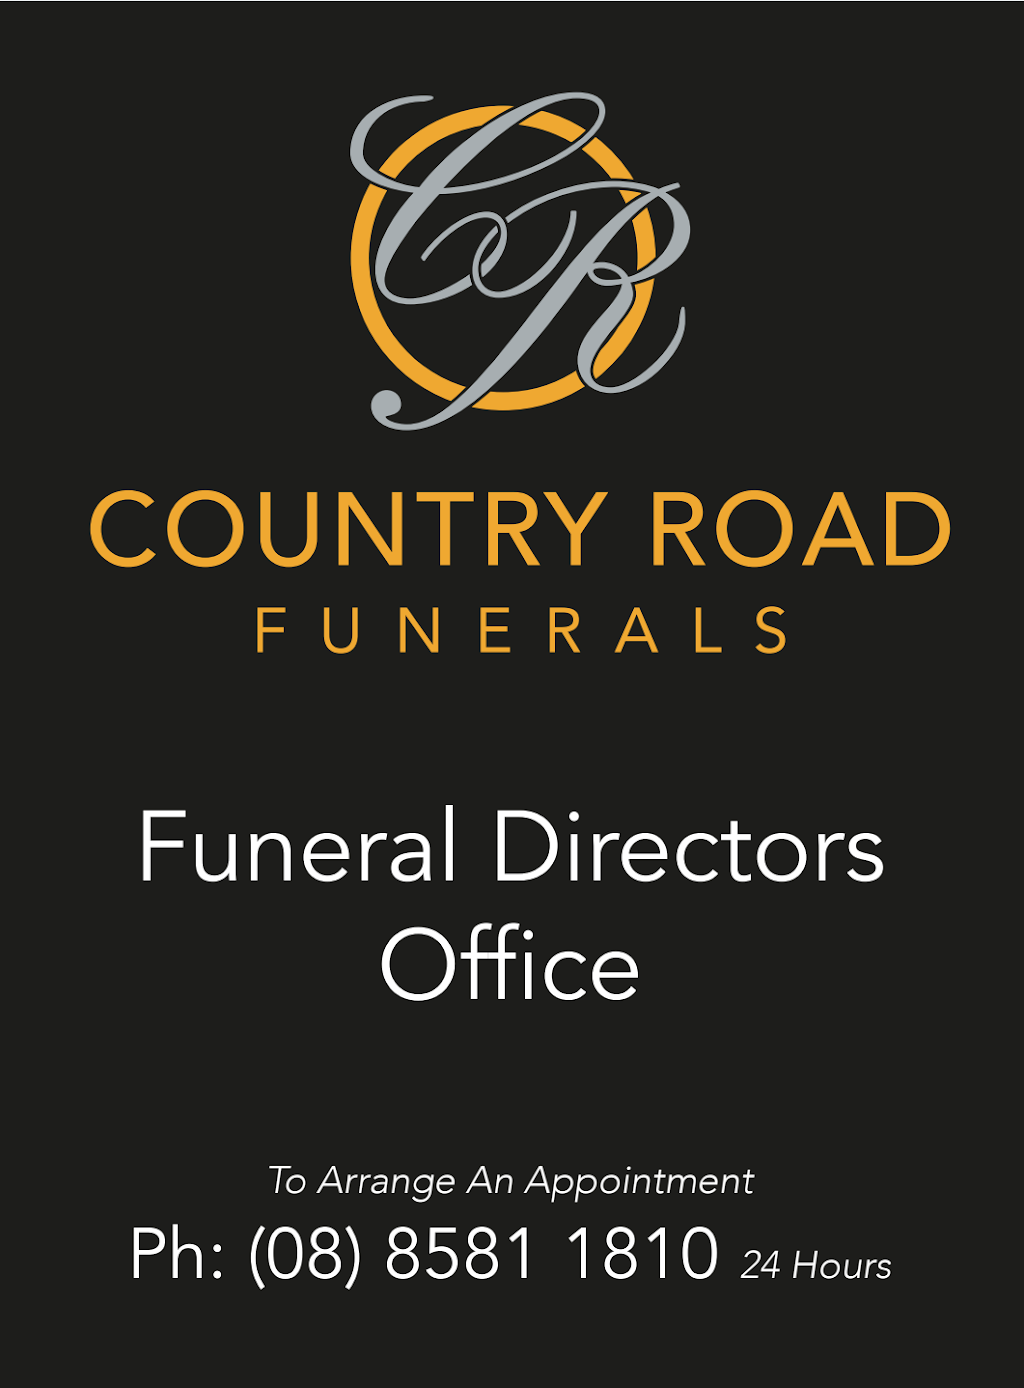 Country Road Funerals Saddleworth | funeral home | 13 Hazeleigh Rd, Saddleworth SA 5412, Australia | 0428766645 OR +61 428 766 645